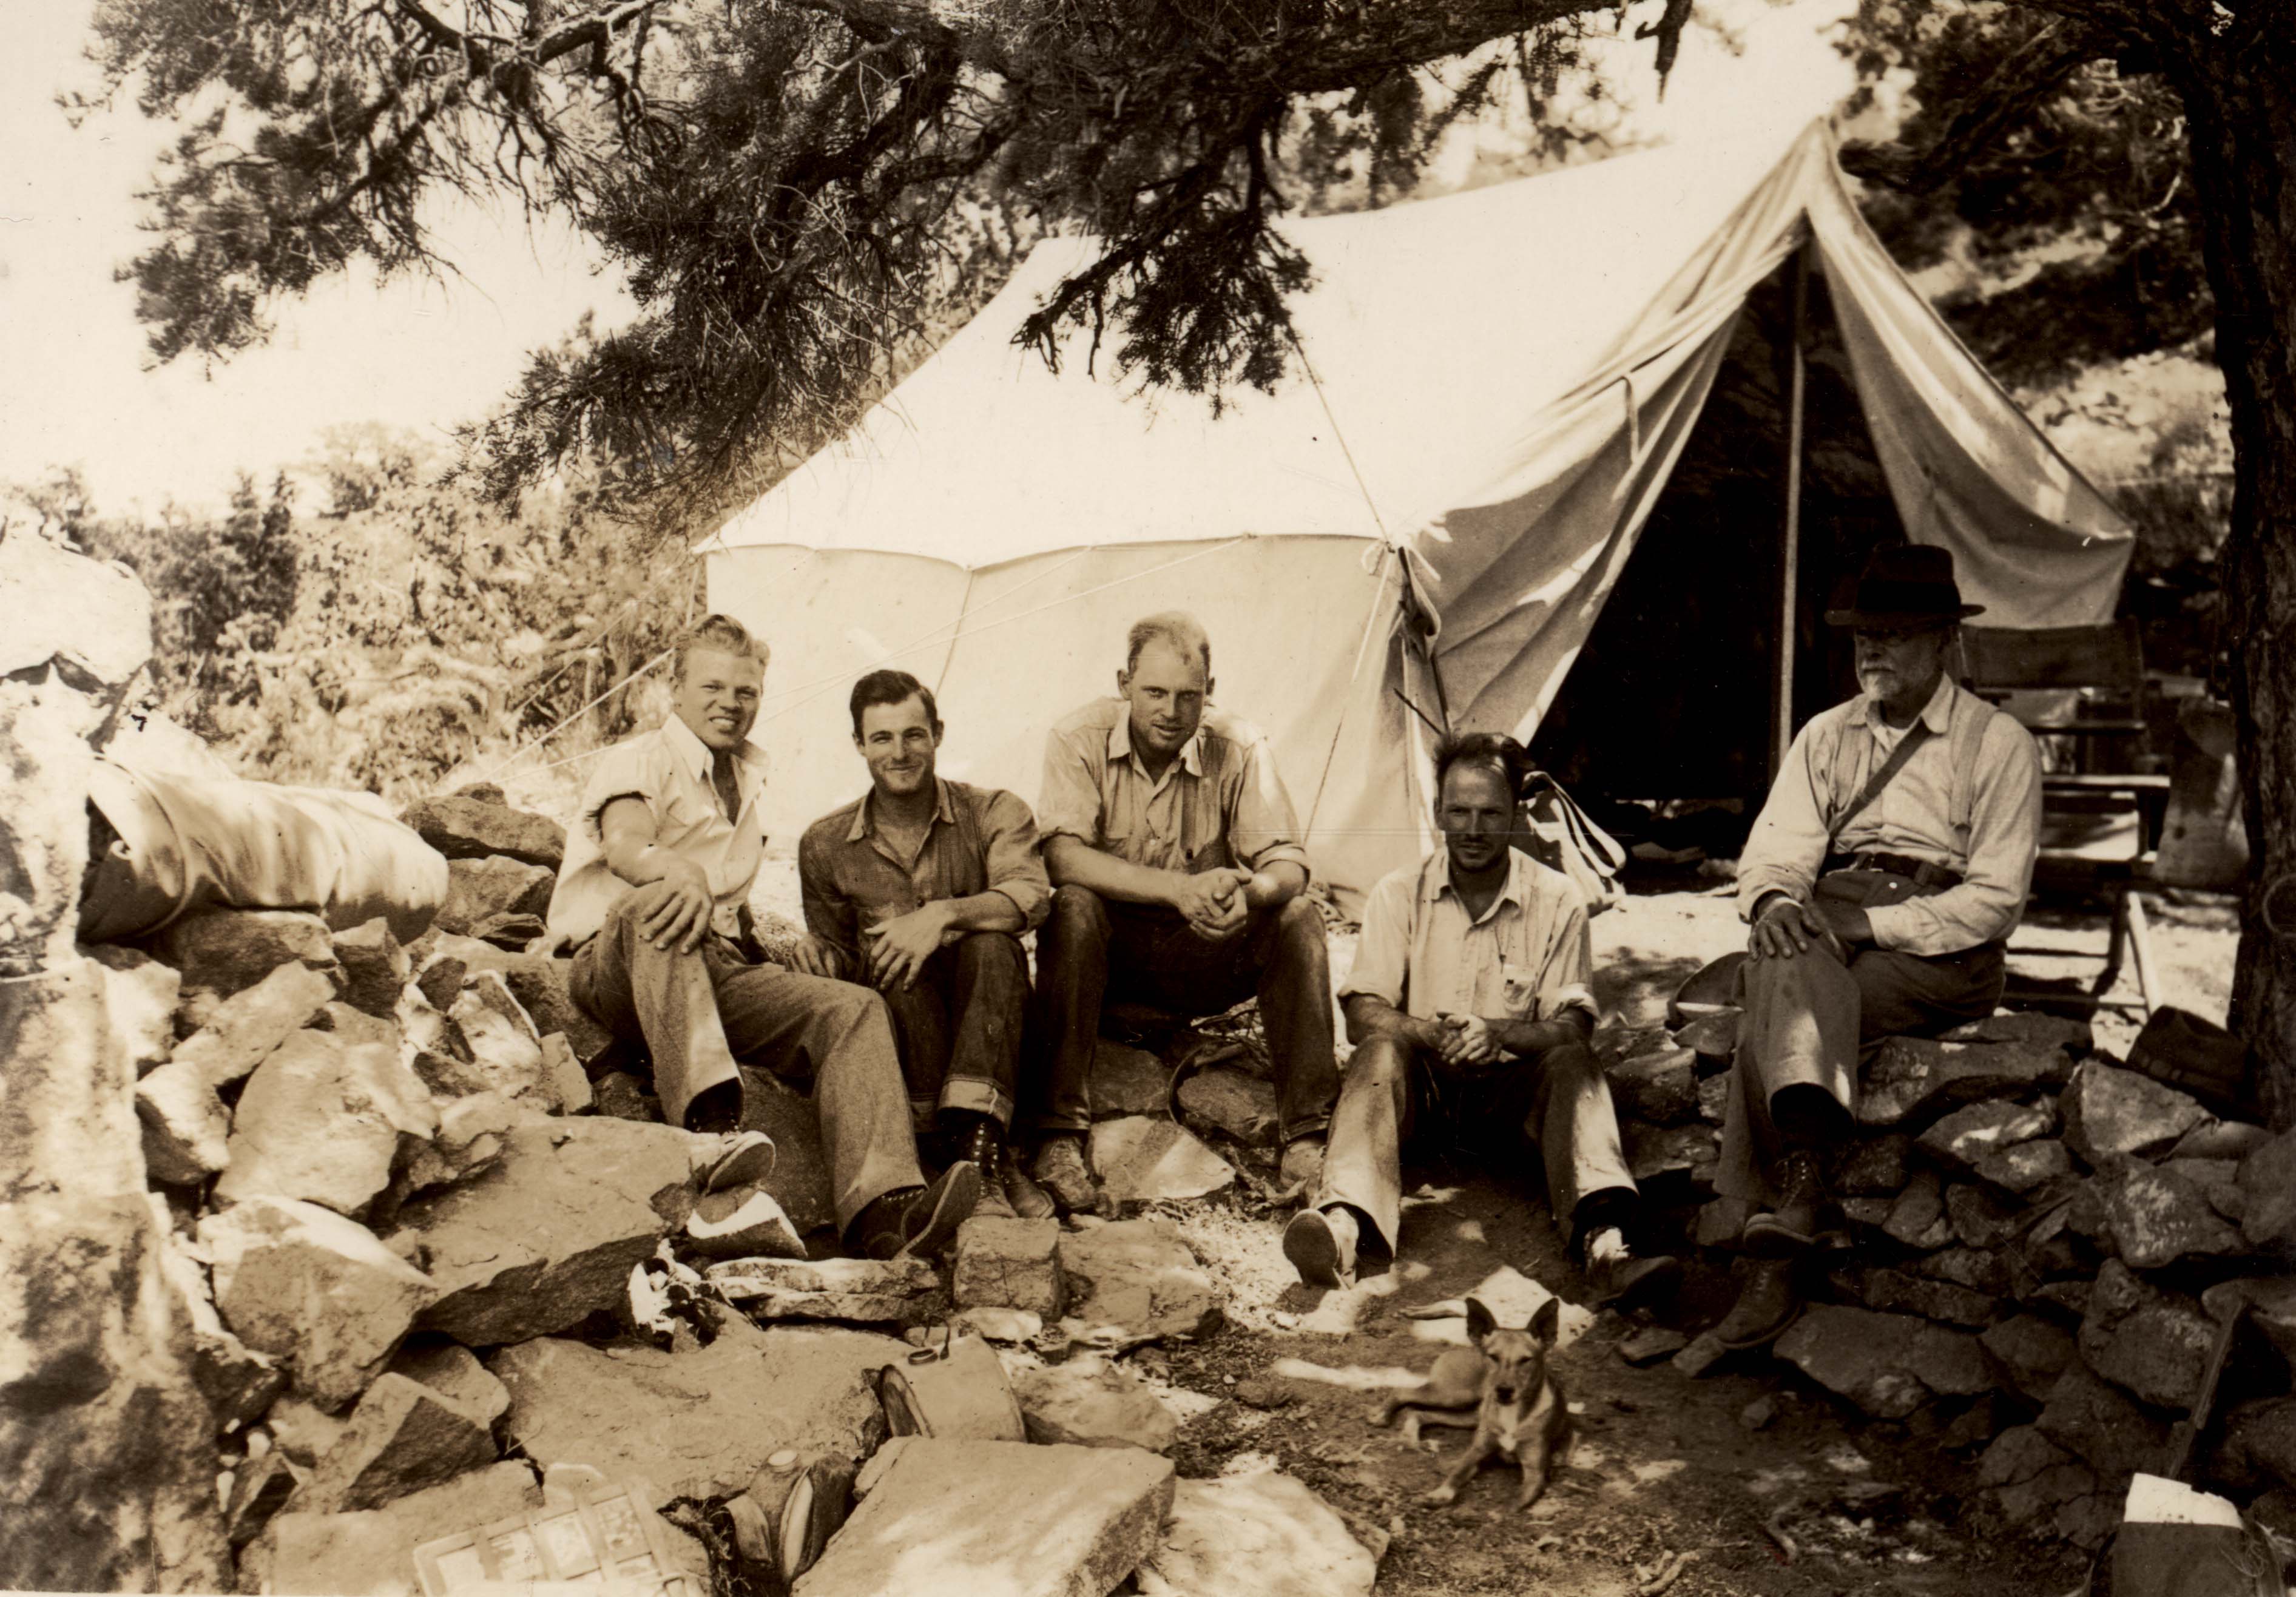 From left to right: Elmer Aldrich, Dale Avery, Dave Johnson, Tom Rodgers, and Joseph Grinnell. Cedar Canyon, Providence Mountains, San Bernardino County, California. June 1, 1938.